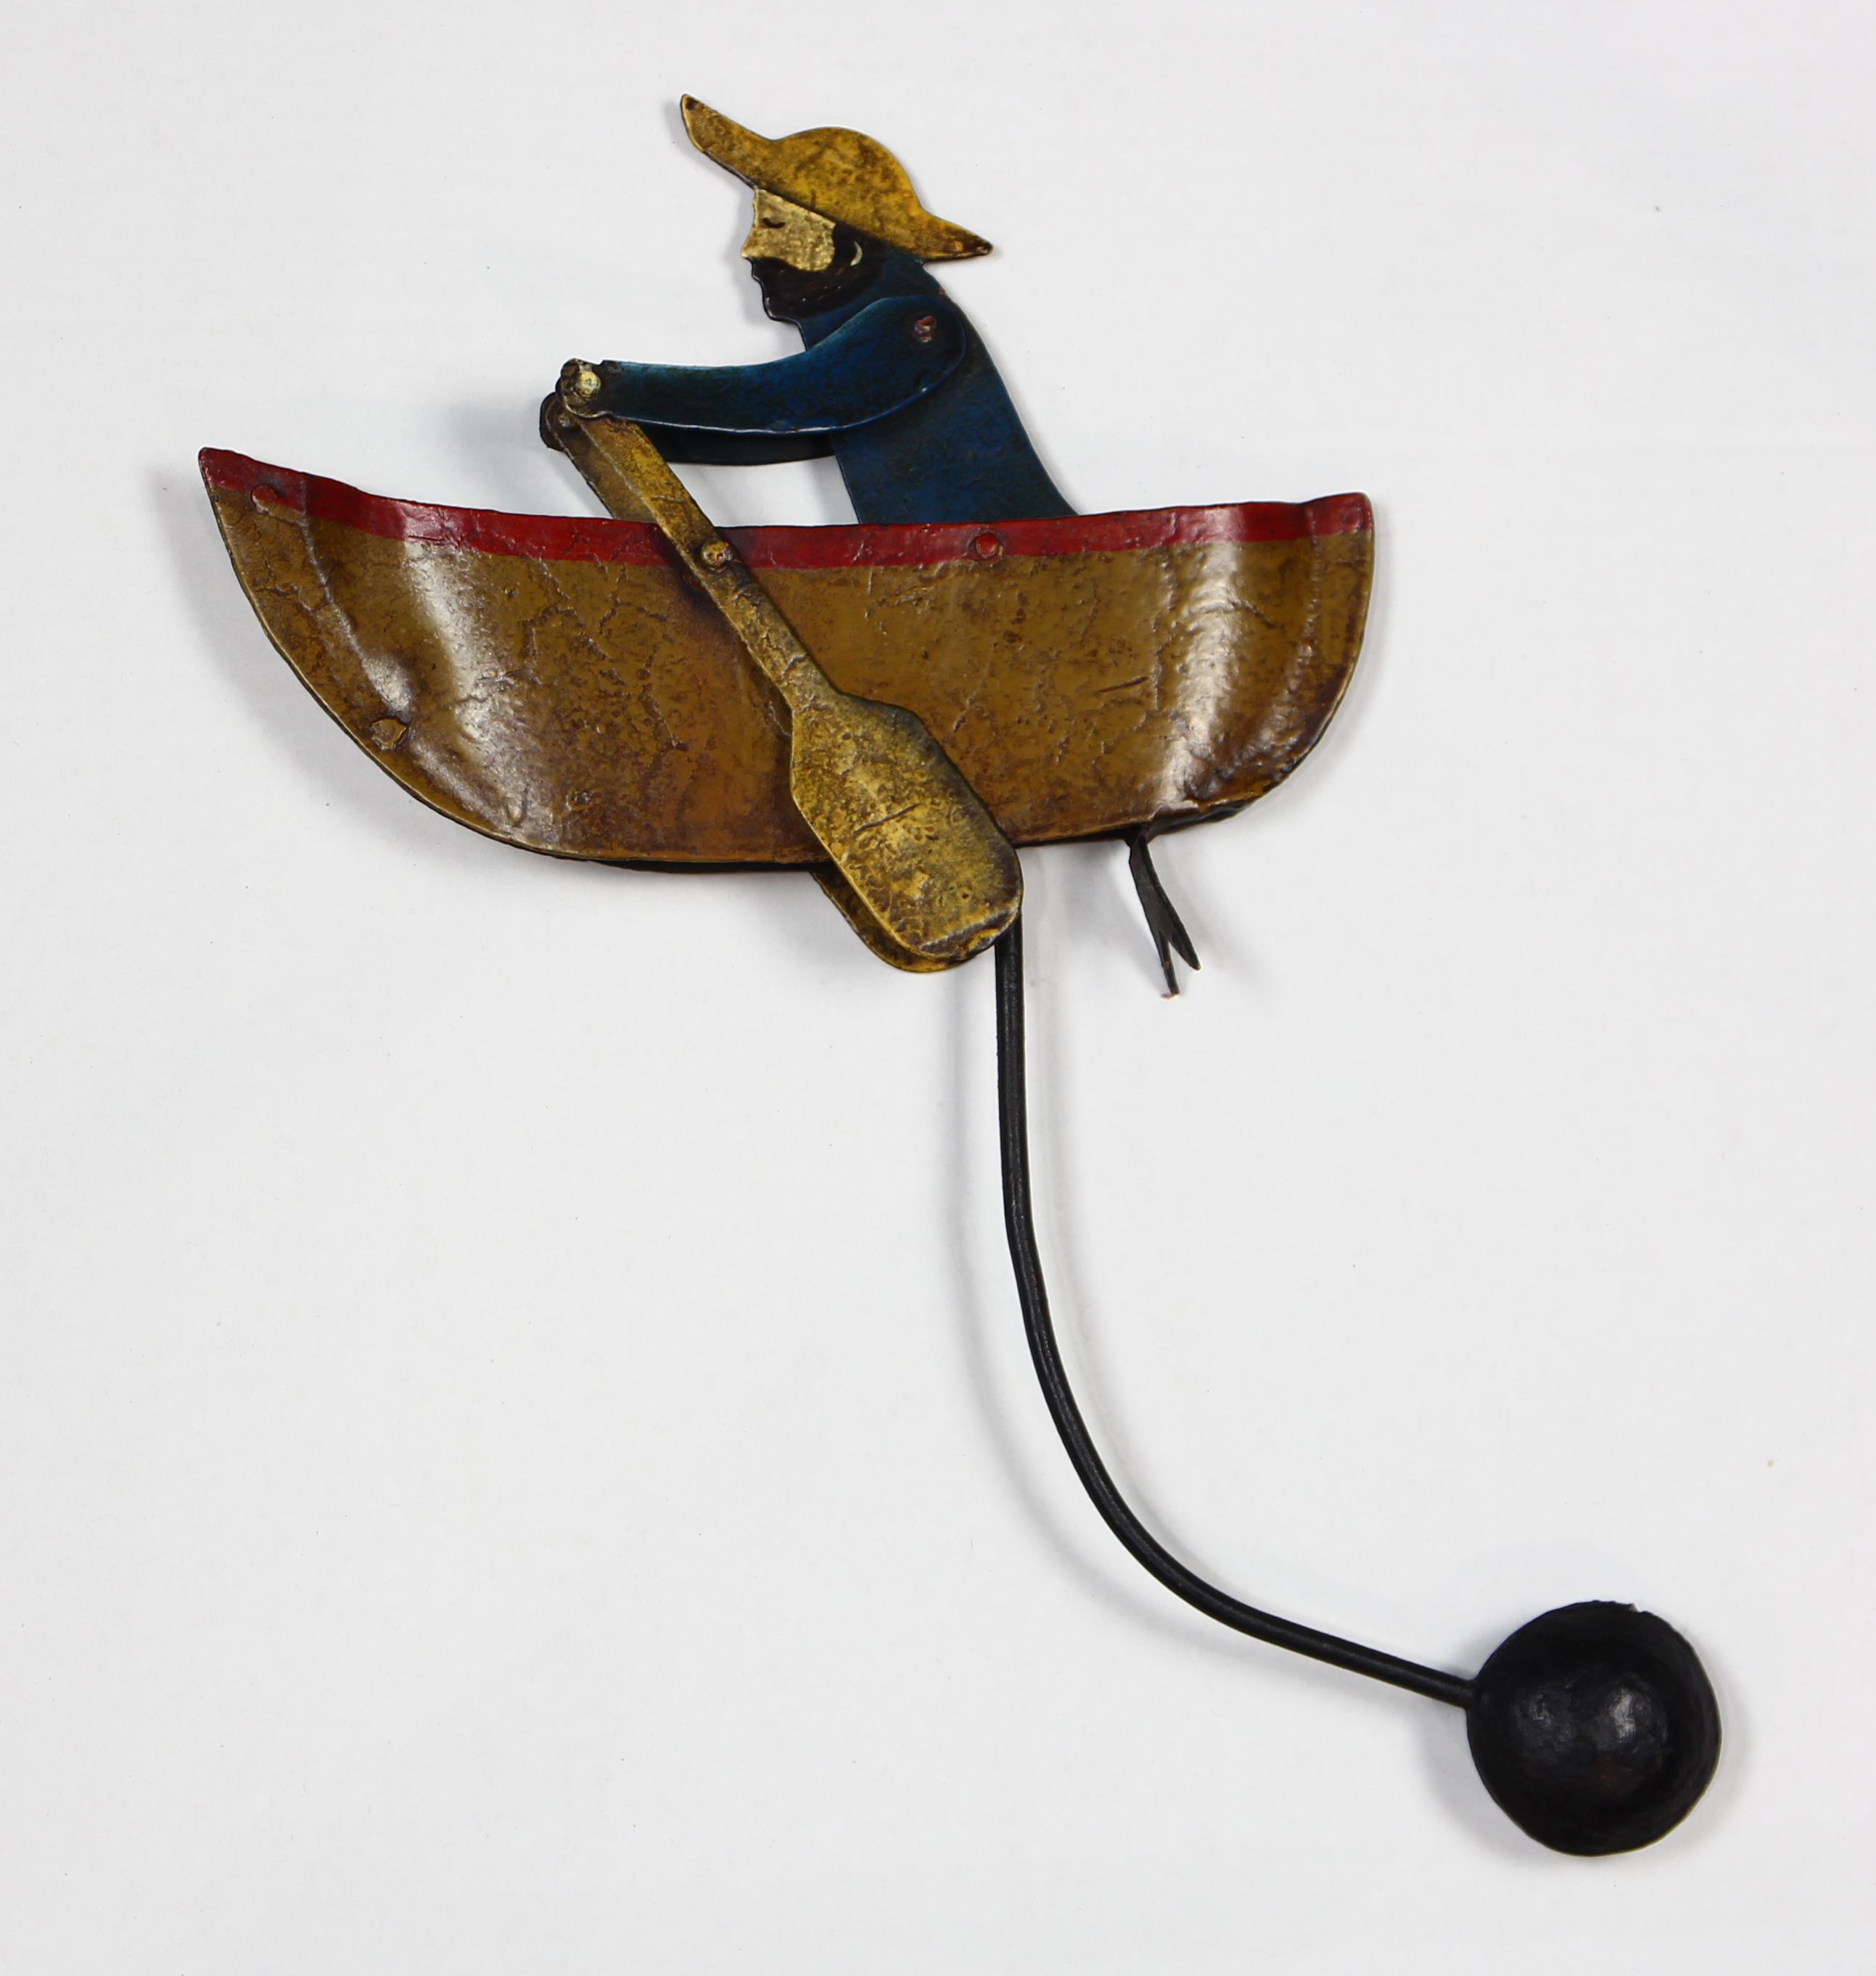 Antique wrought metal and polychrome decorated whirligig, depicting a sailor rowing his boat, 14.5"h - Image 3 of 3